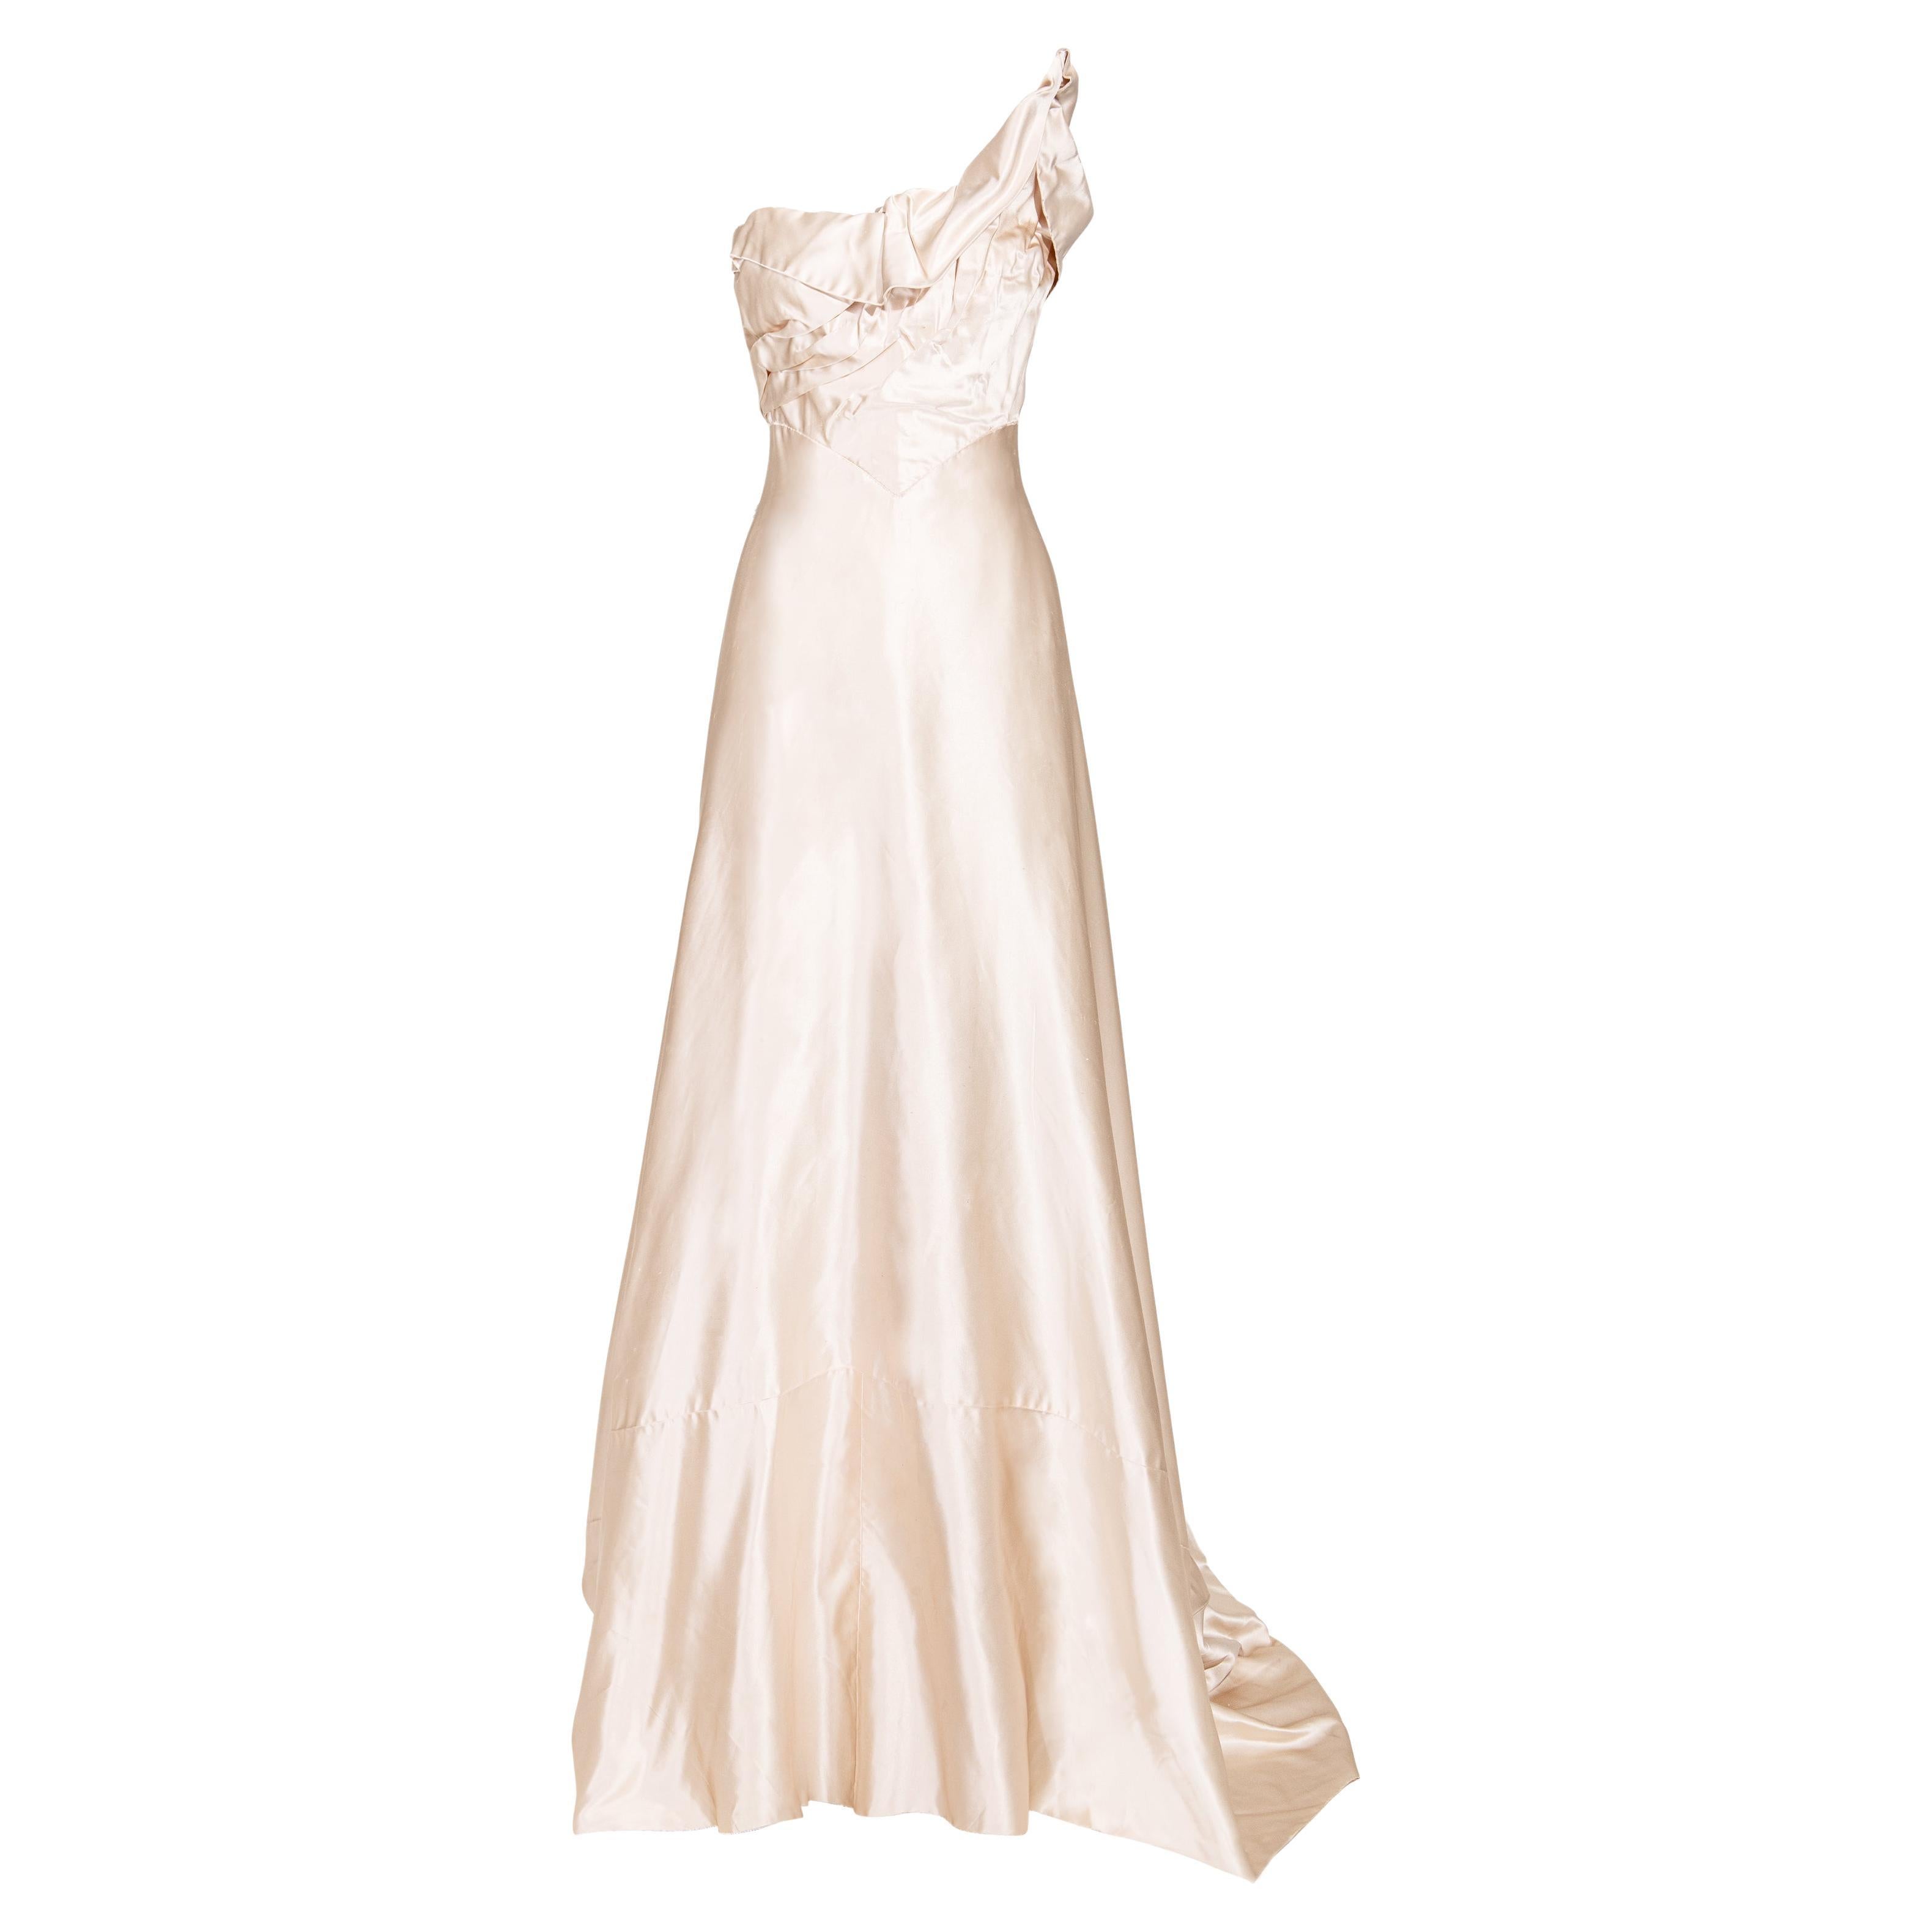 1940's Irene Lentz Haute Couture Strapless High-Low Cream Silk Gown For Sale